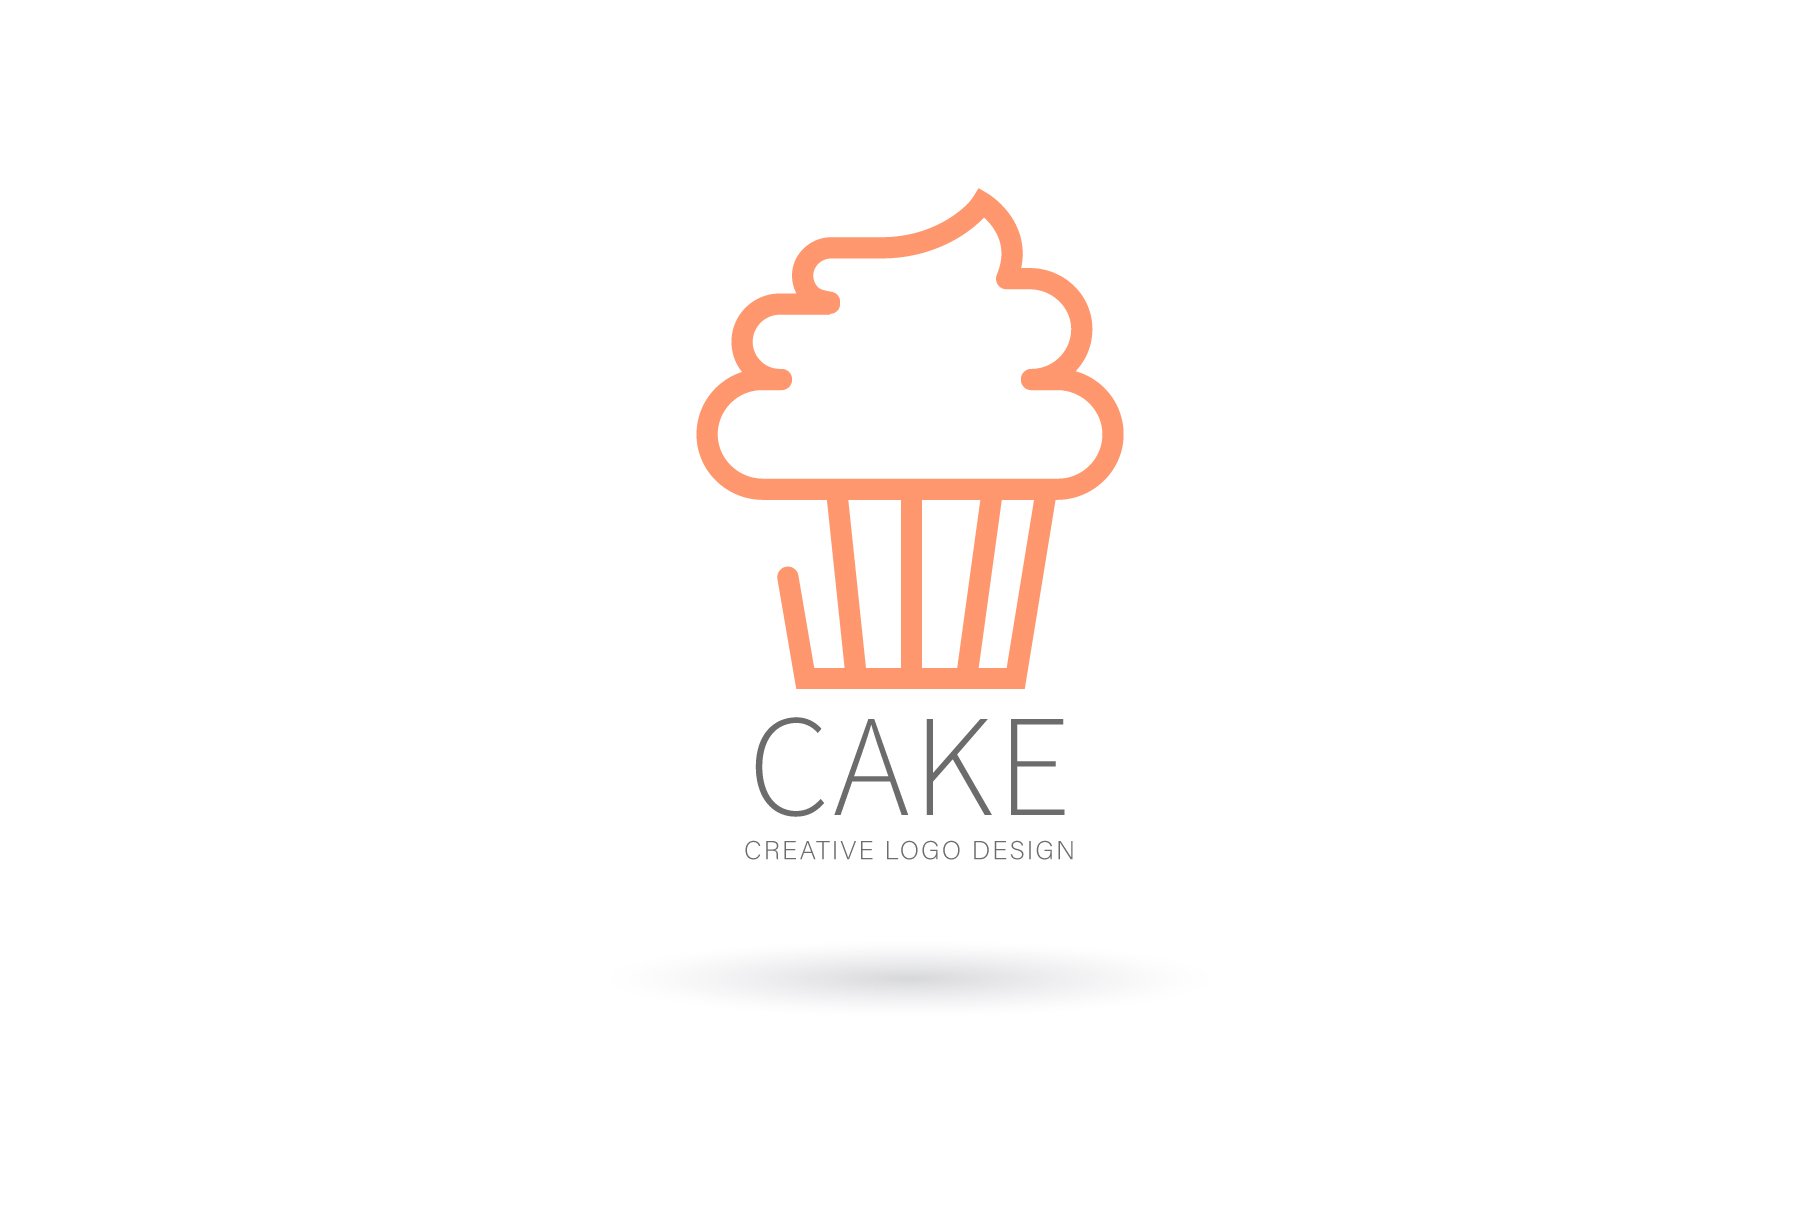 Free: Bakery cake logo concept Free Vector - nohat.cc